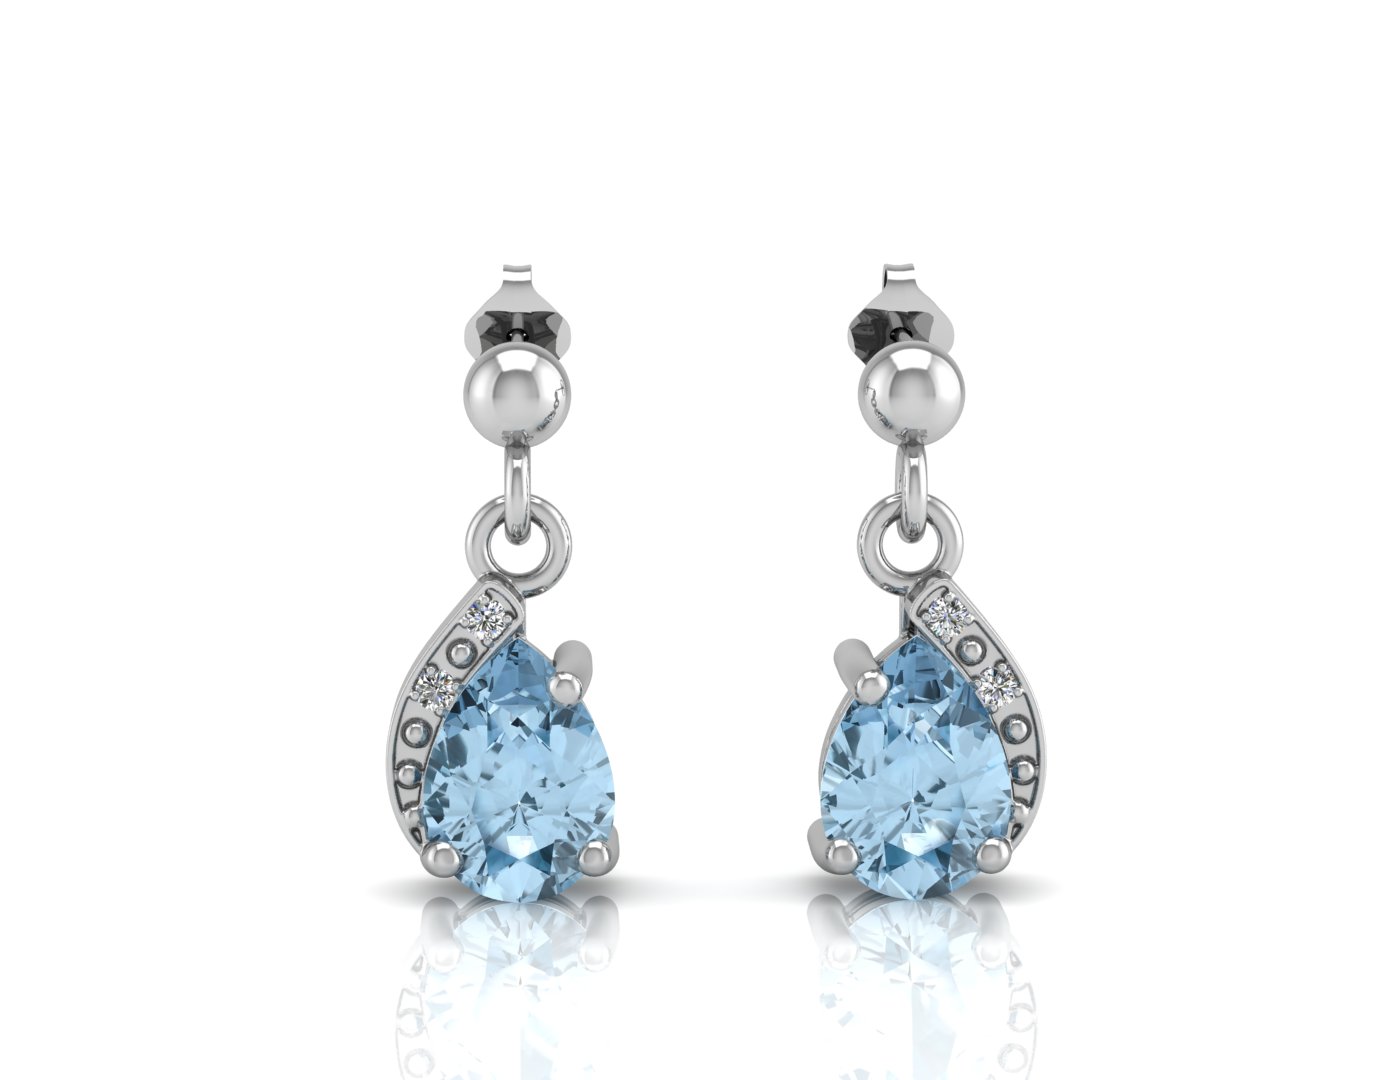 9ct White Gold Diamond And Blue Topaz Earring (BT 1.43) 0.01 Carats - Image 3 of 4